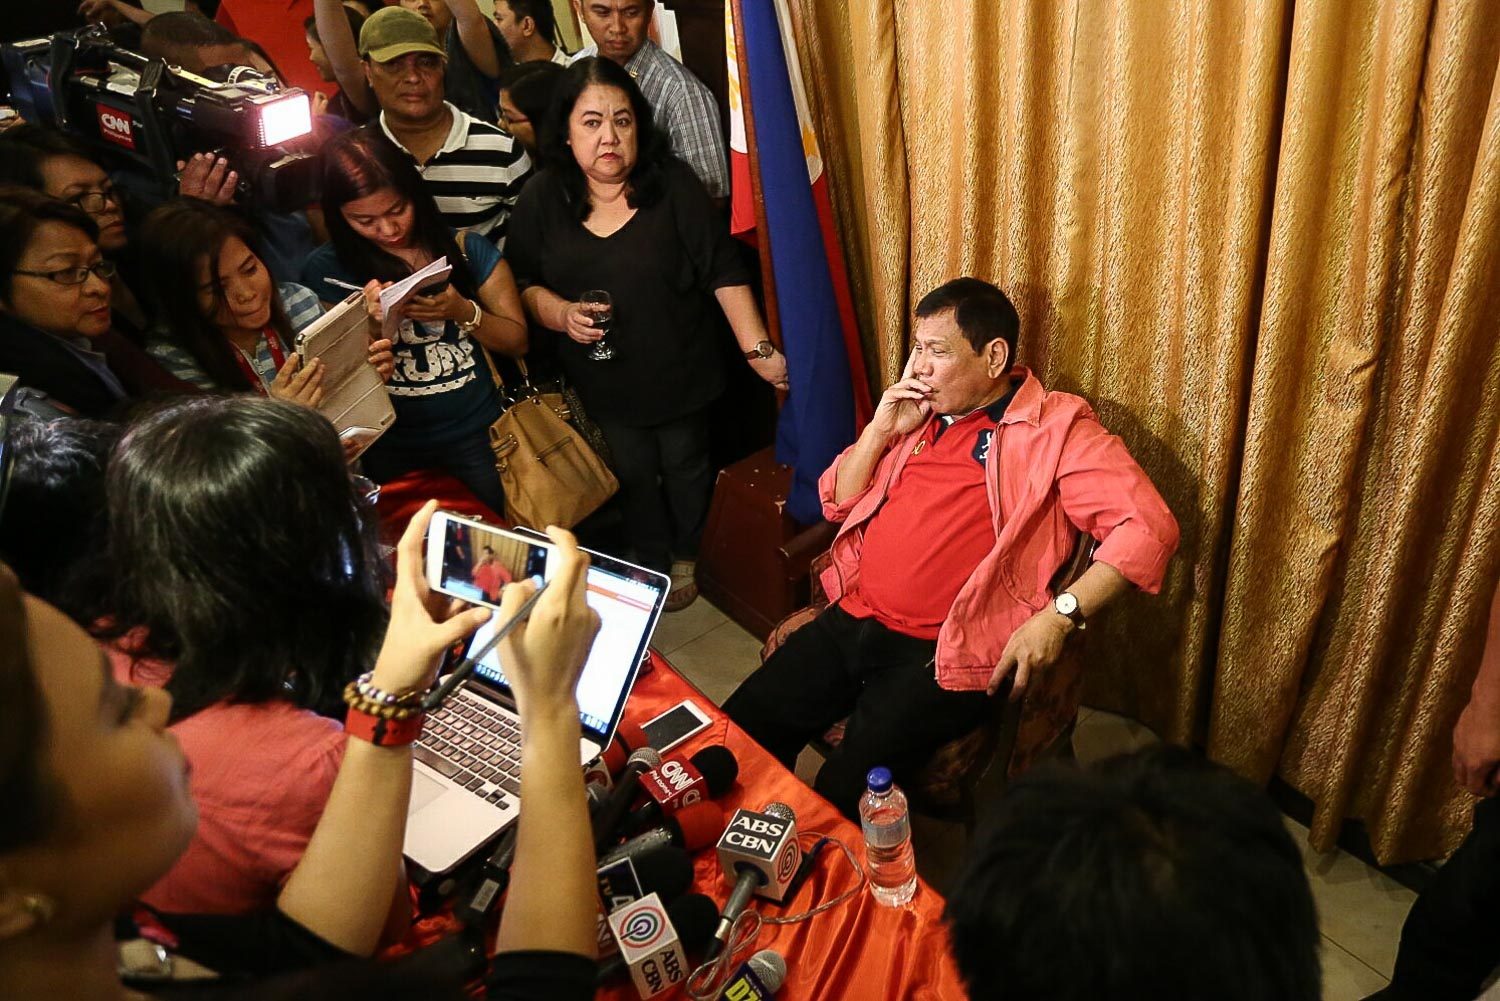 Duterte’s relationship with media to ‘normalize’ soon – spokesman